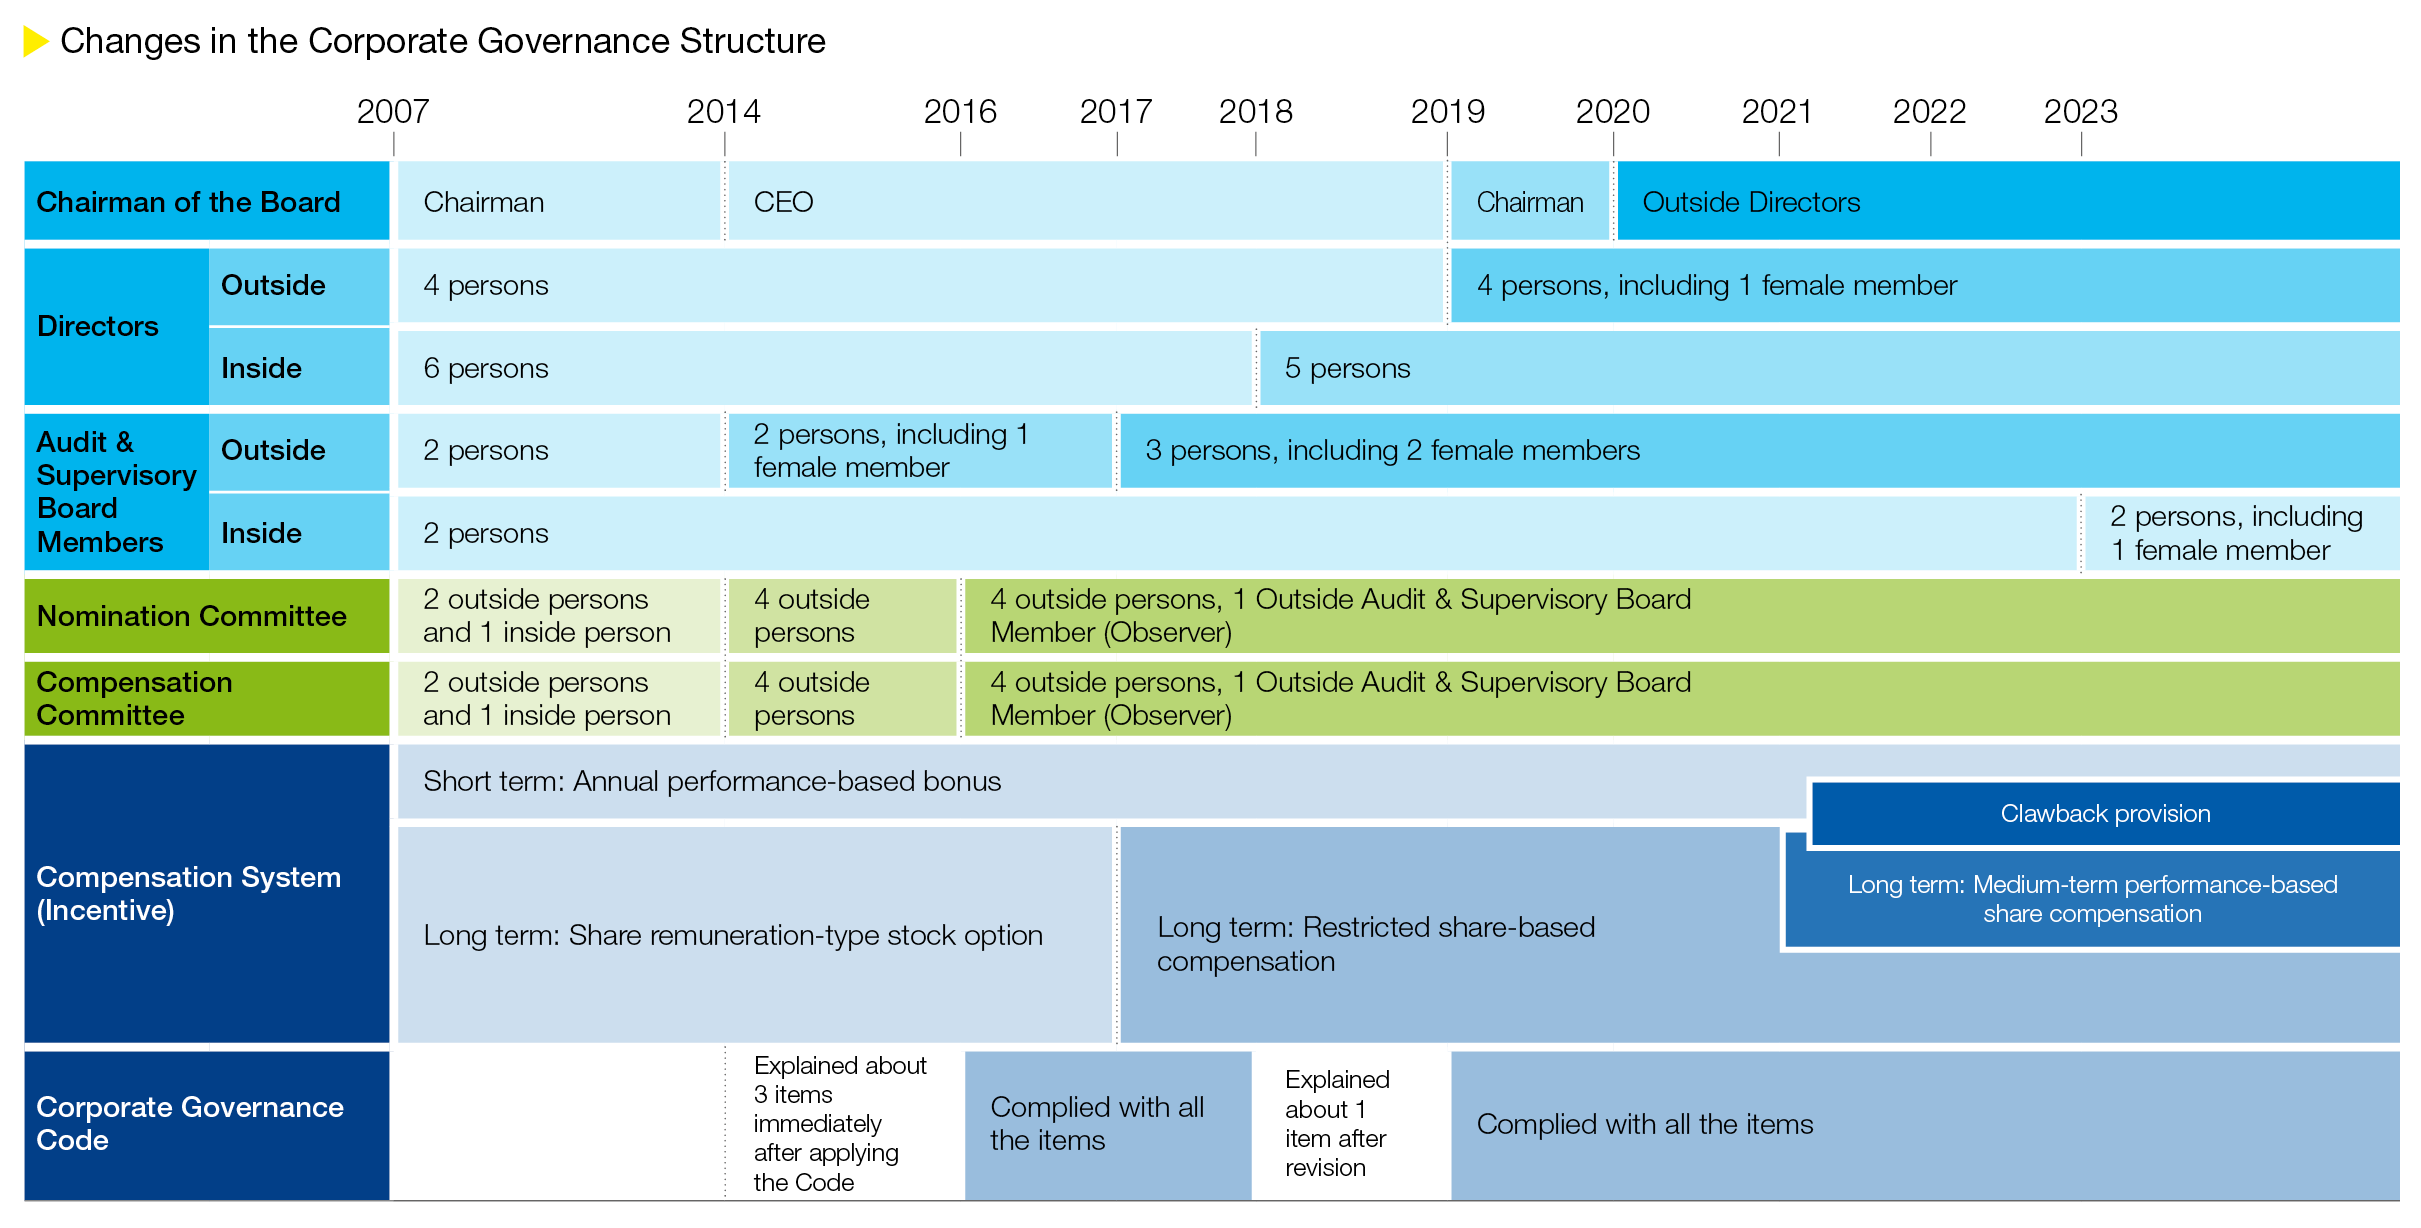 Changes in the Corporate Governance Structure